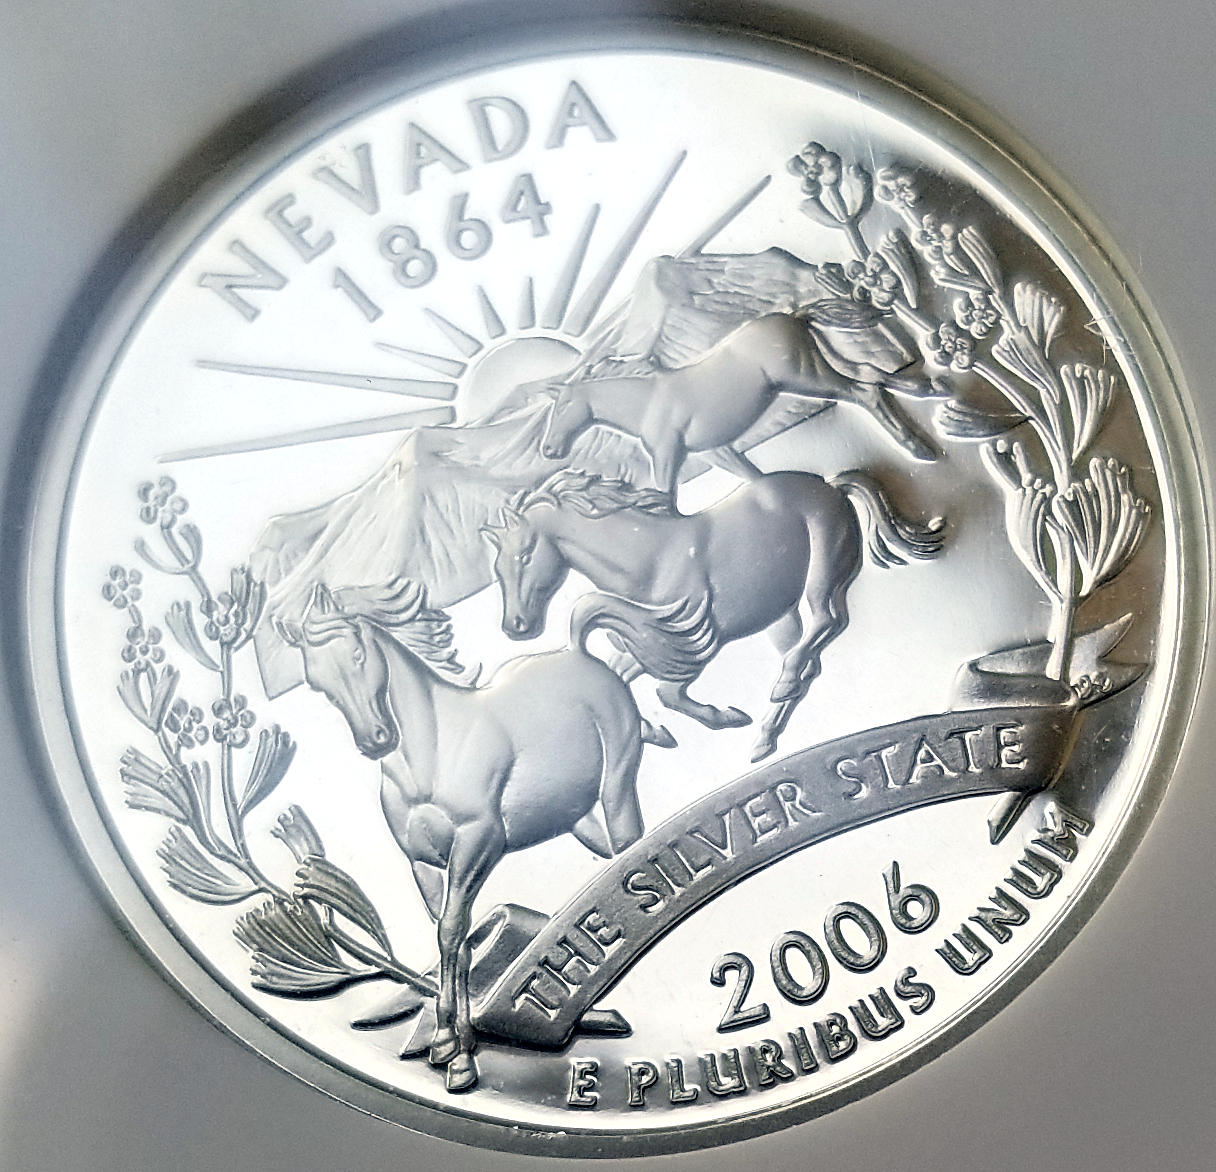 2005 S Nevada Silver Proof 70 Reverse CLOSE UP angle1.jpg